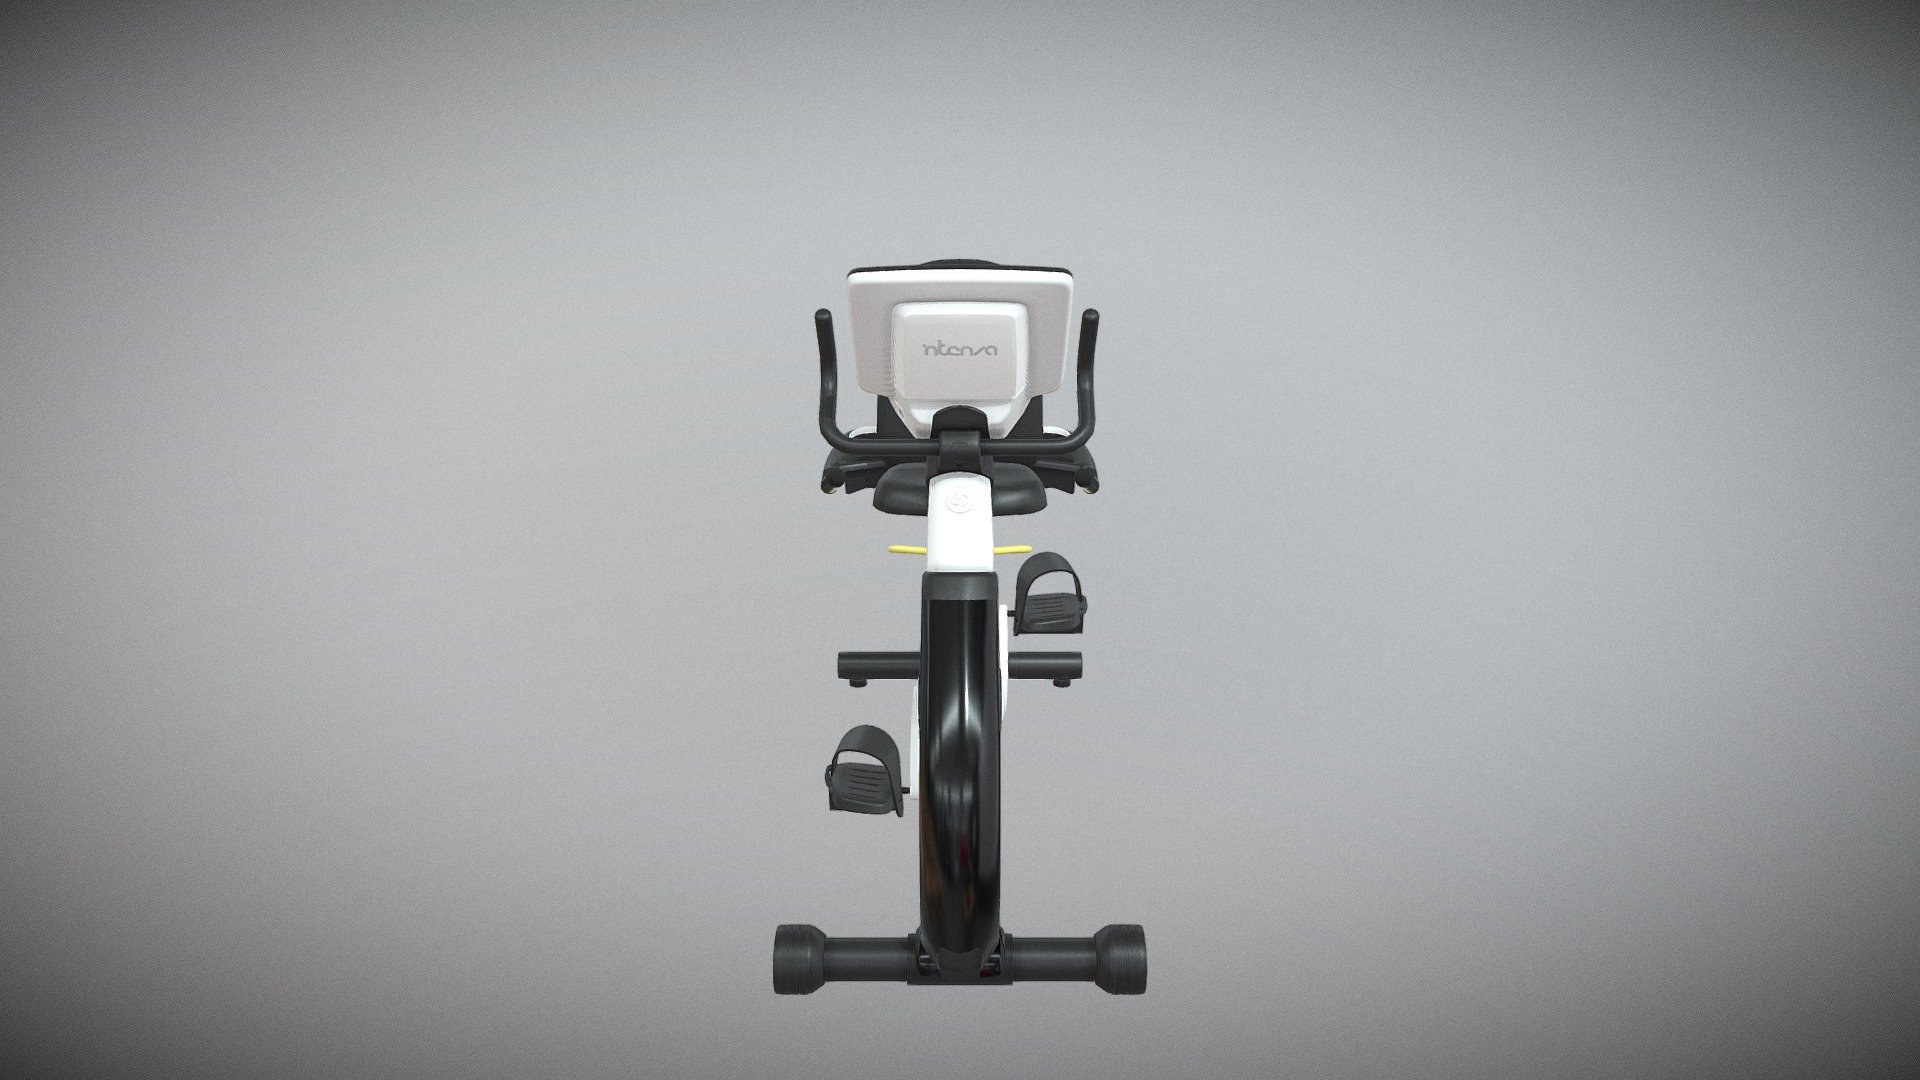 Strengthens the cardiovascular system and condition. The adjustable seat guarantees ergonomically optimal training. Intuitive control via panel or touchscreen.

http://dhz-fitness.de/en/cardio-equipment#550RBe2 - INTENZA SEATED CYCLE - 3D model by supersport-fitness 3d model